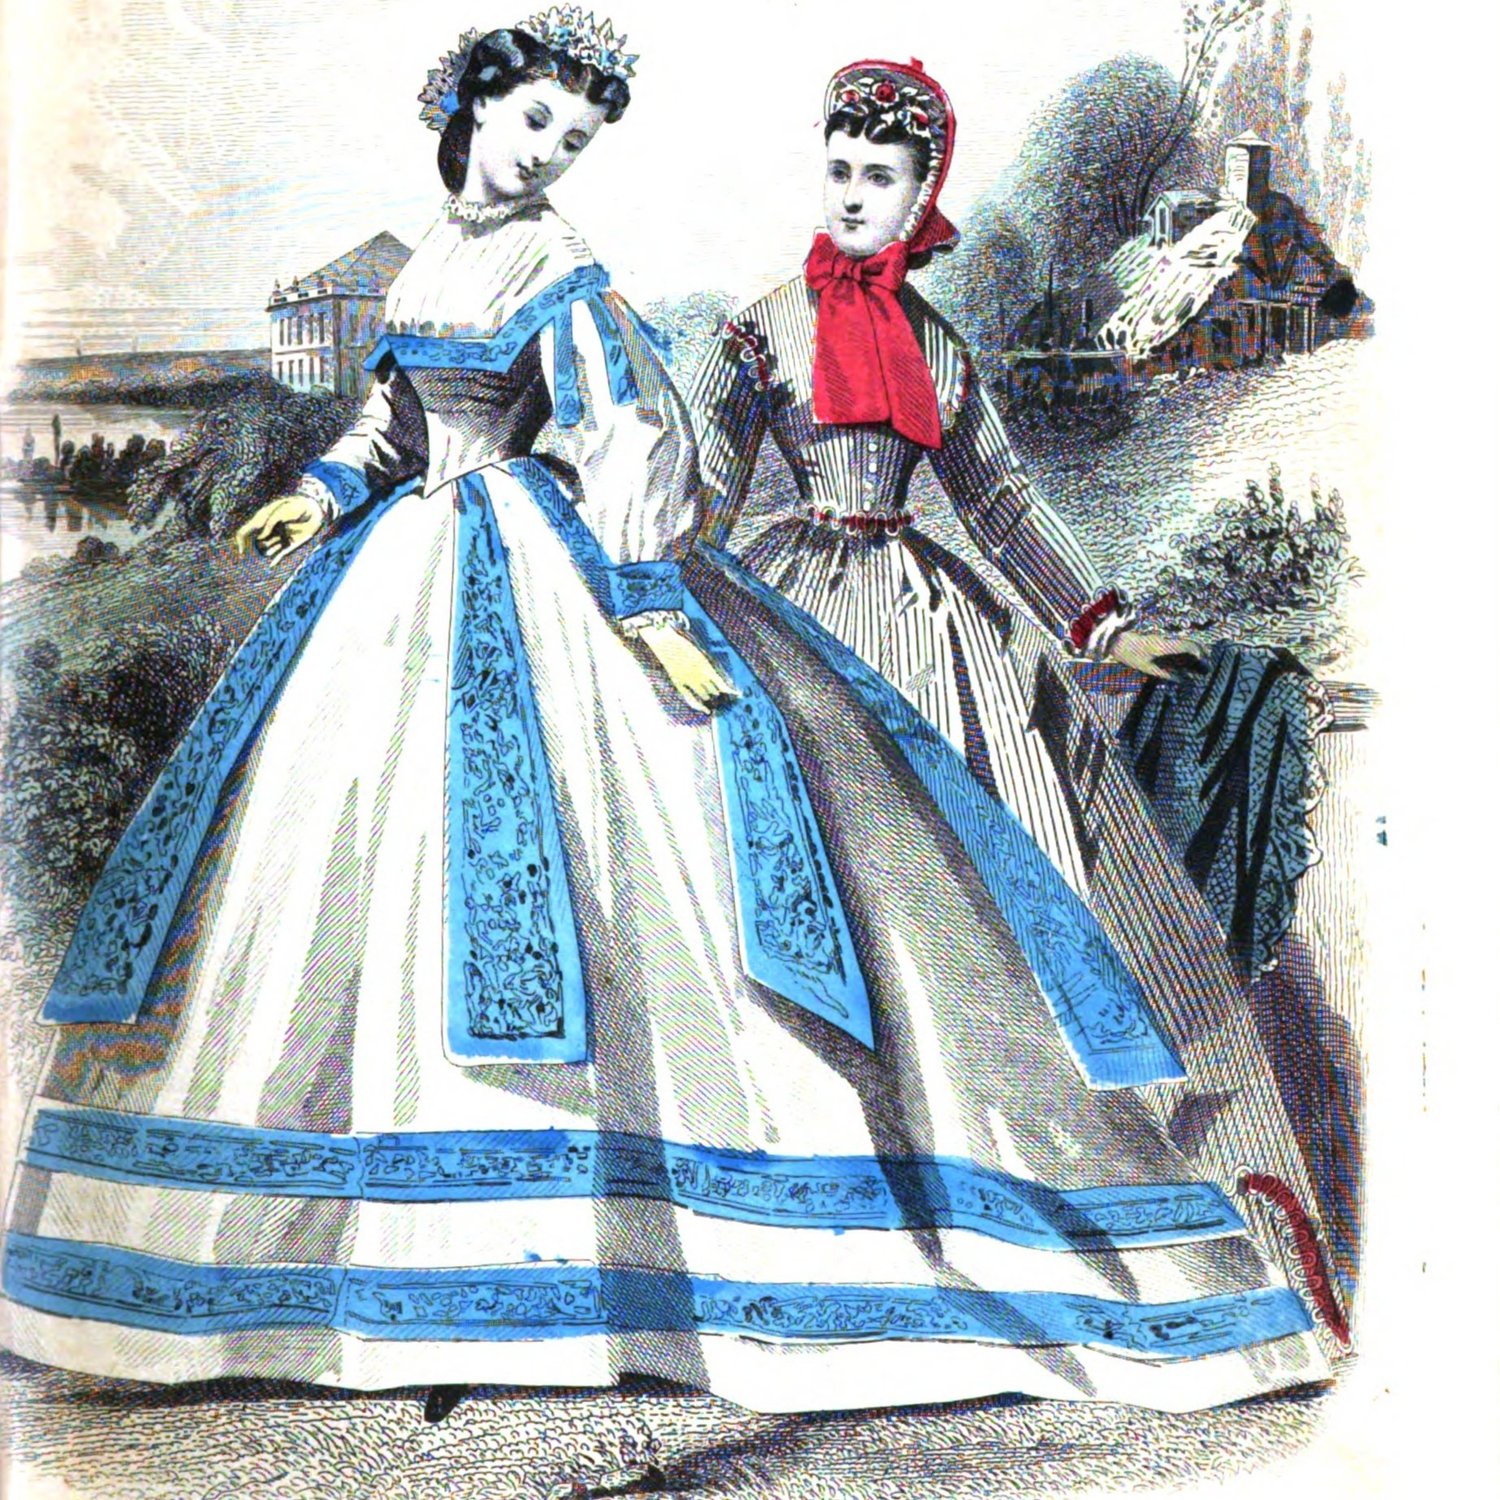 Why Victorian etiquette about dresses is so ridiculous